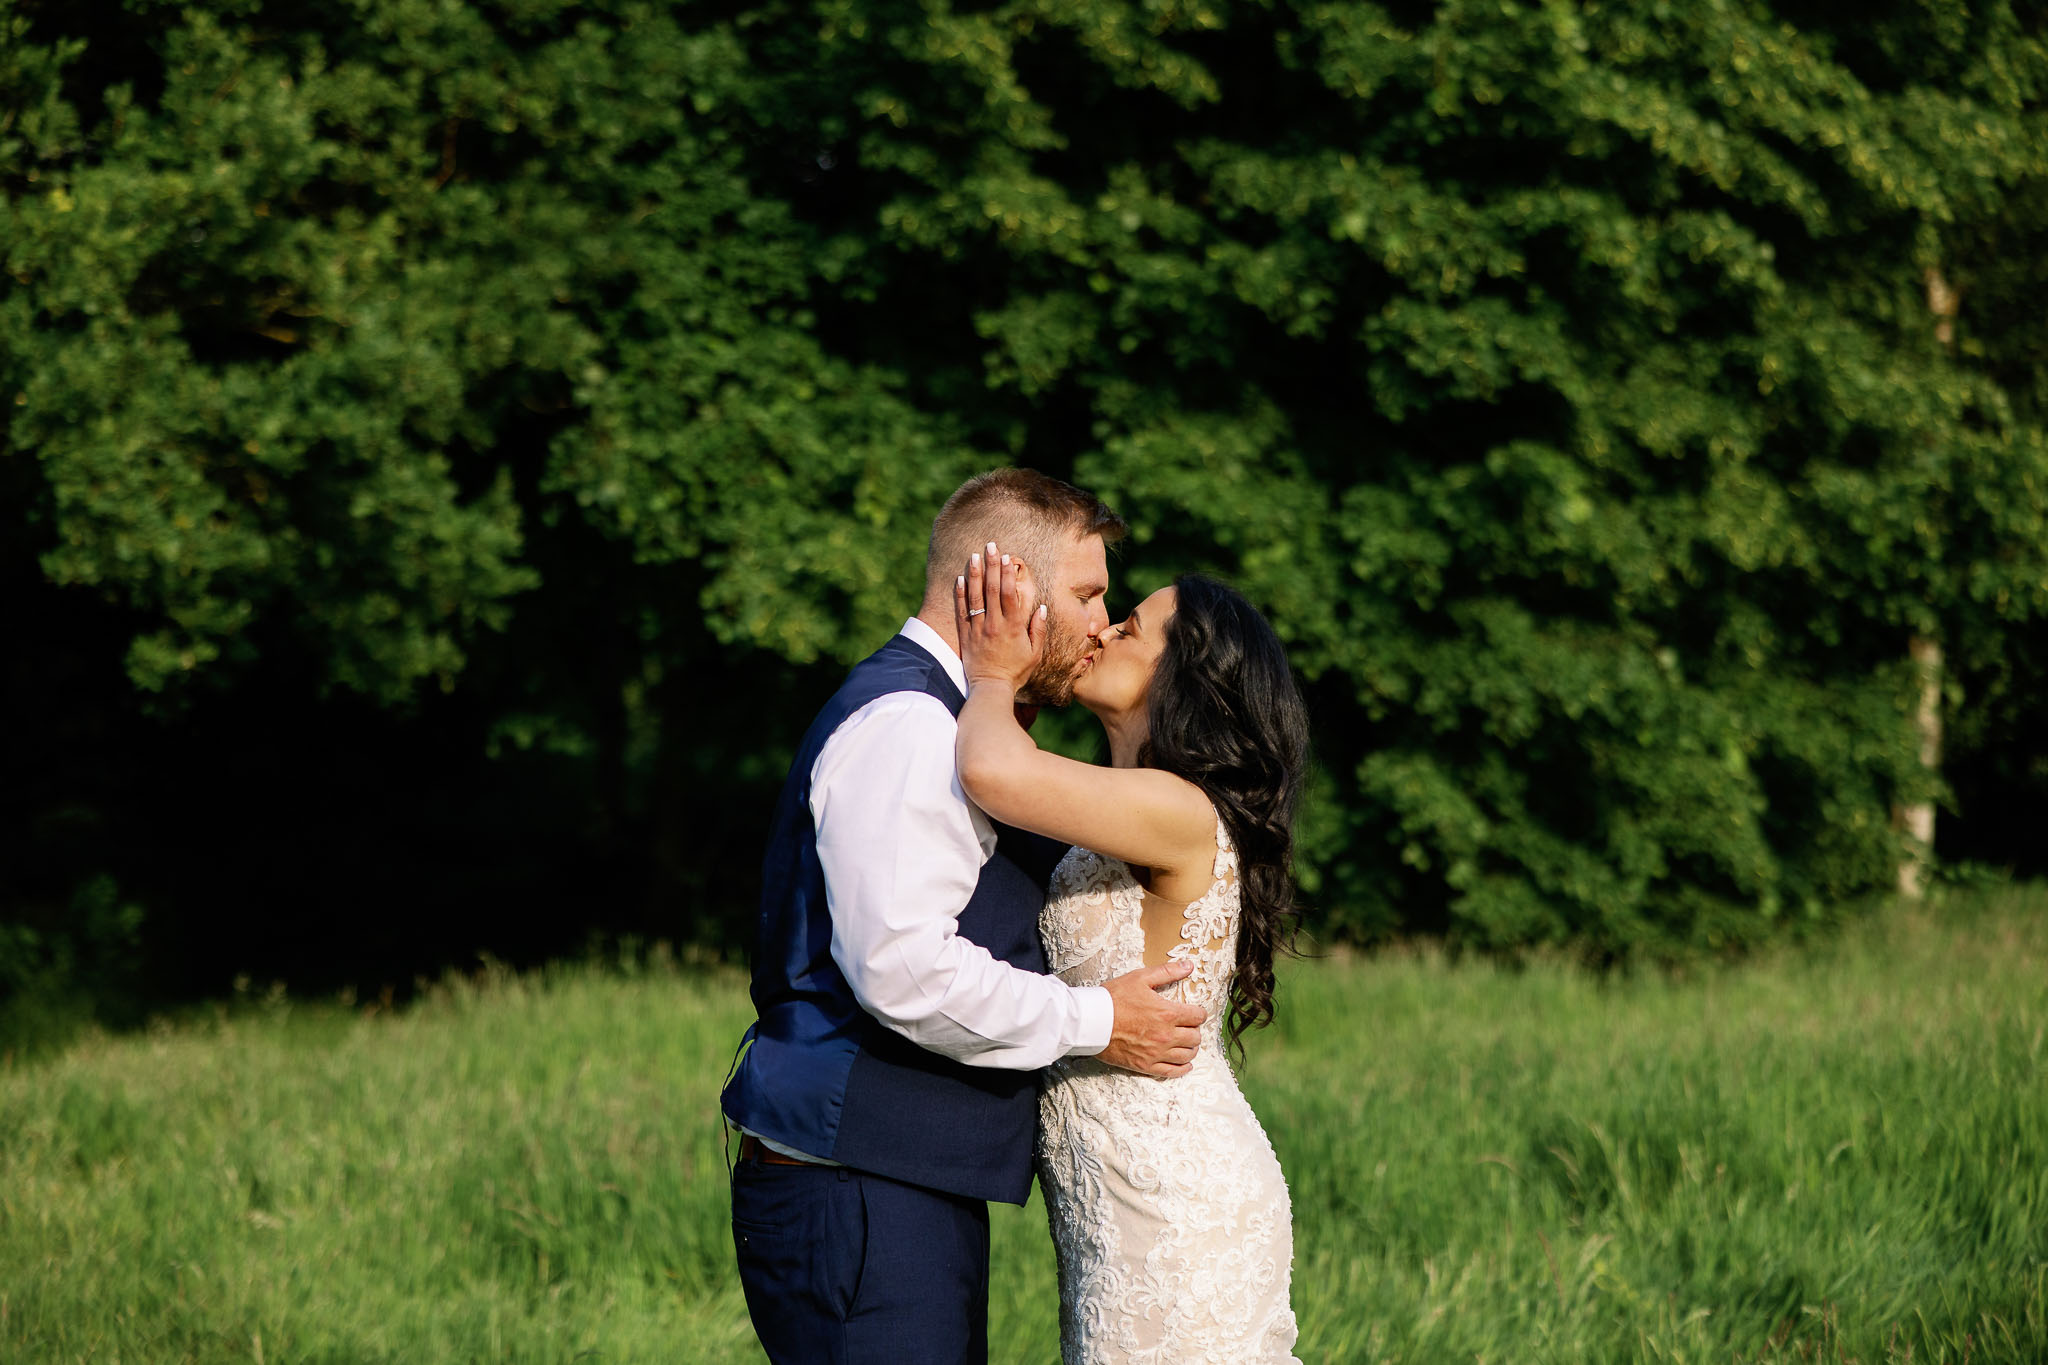 Gorgeous and fun wedding photos at The Oak Tree Of Peover